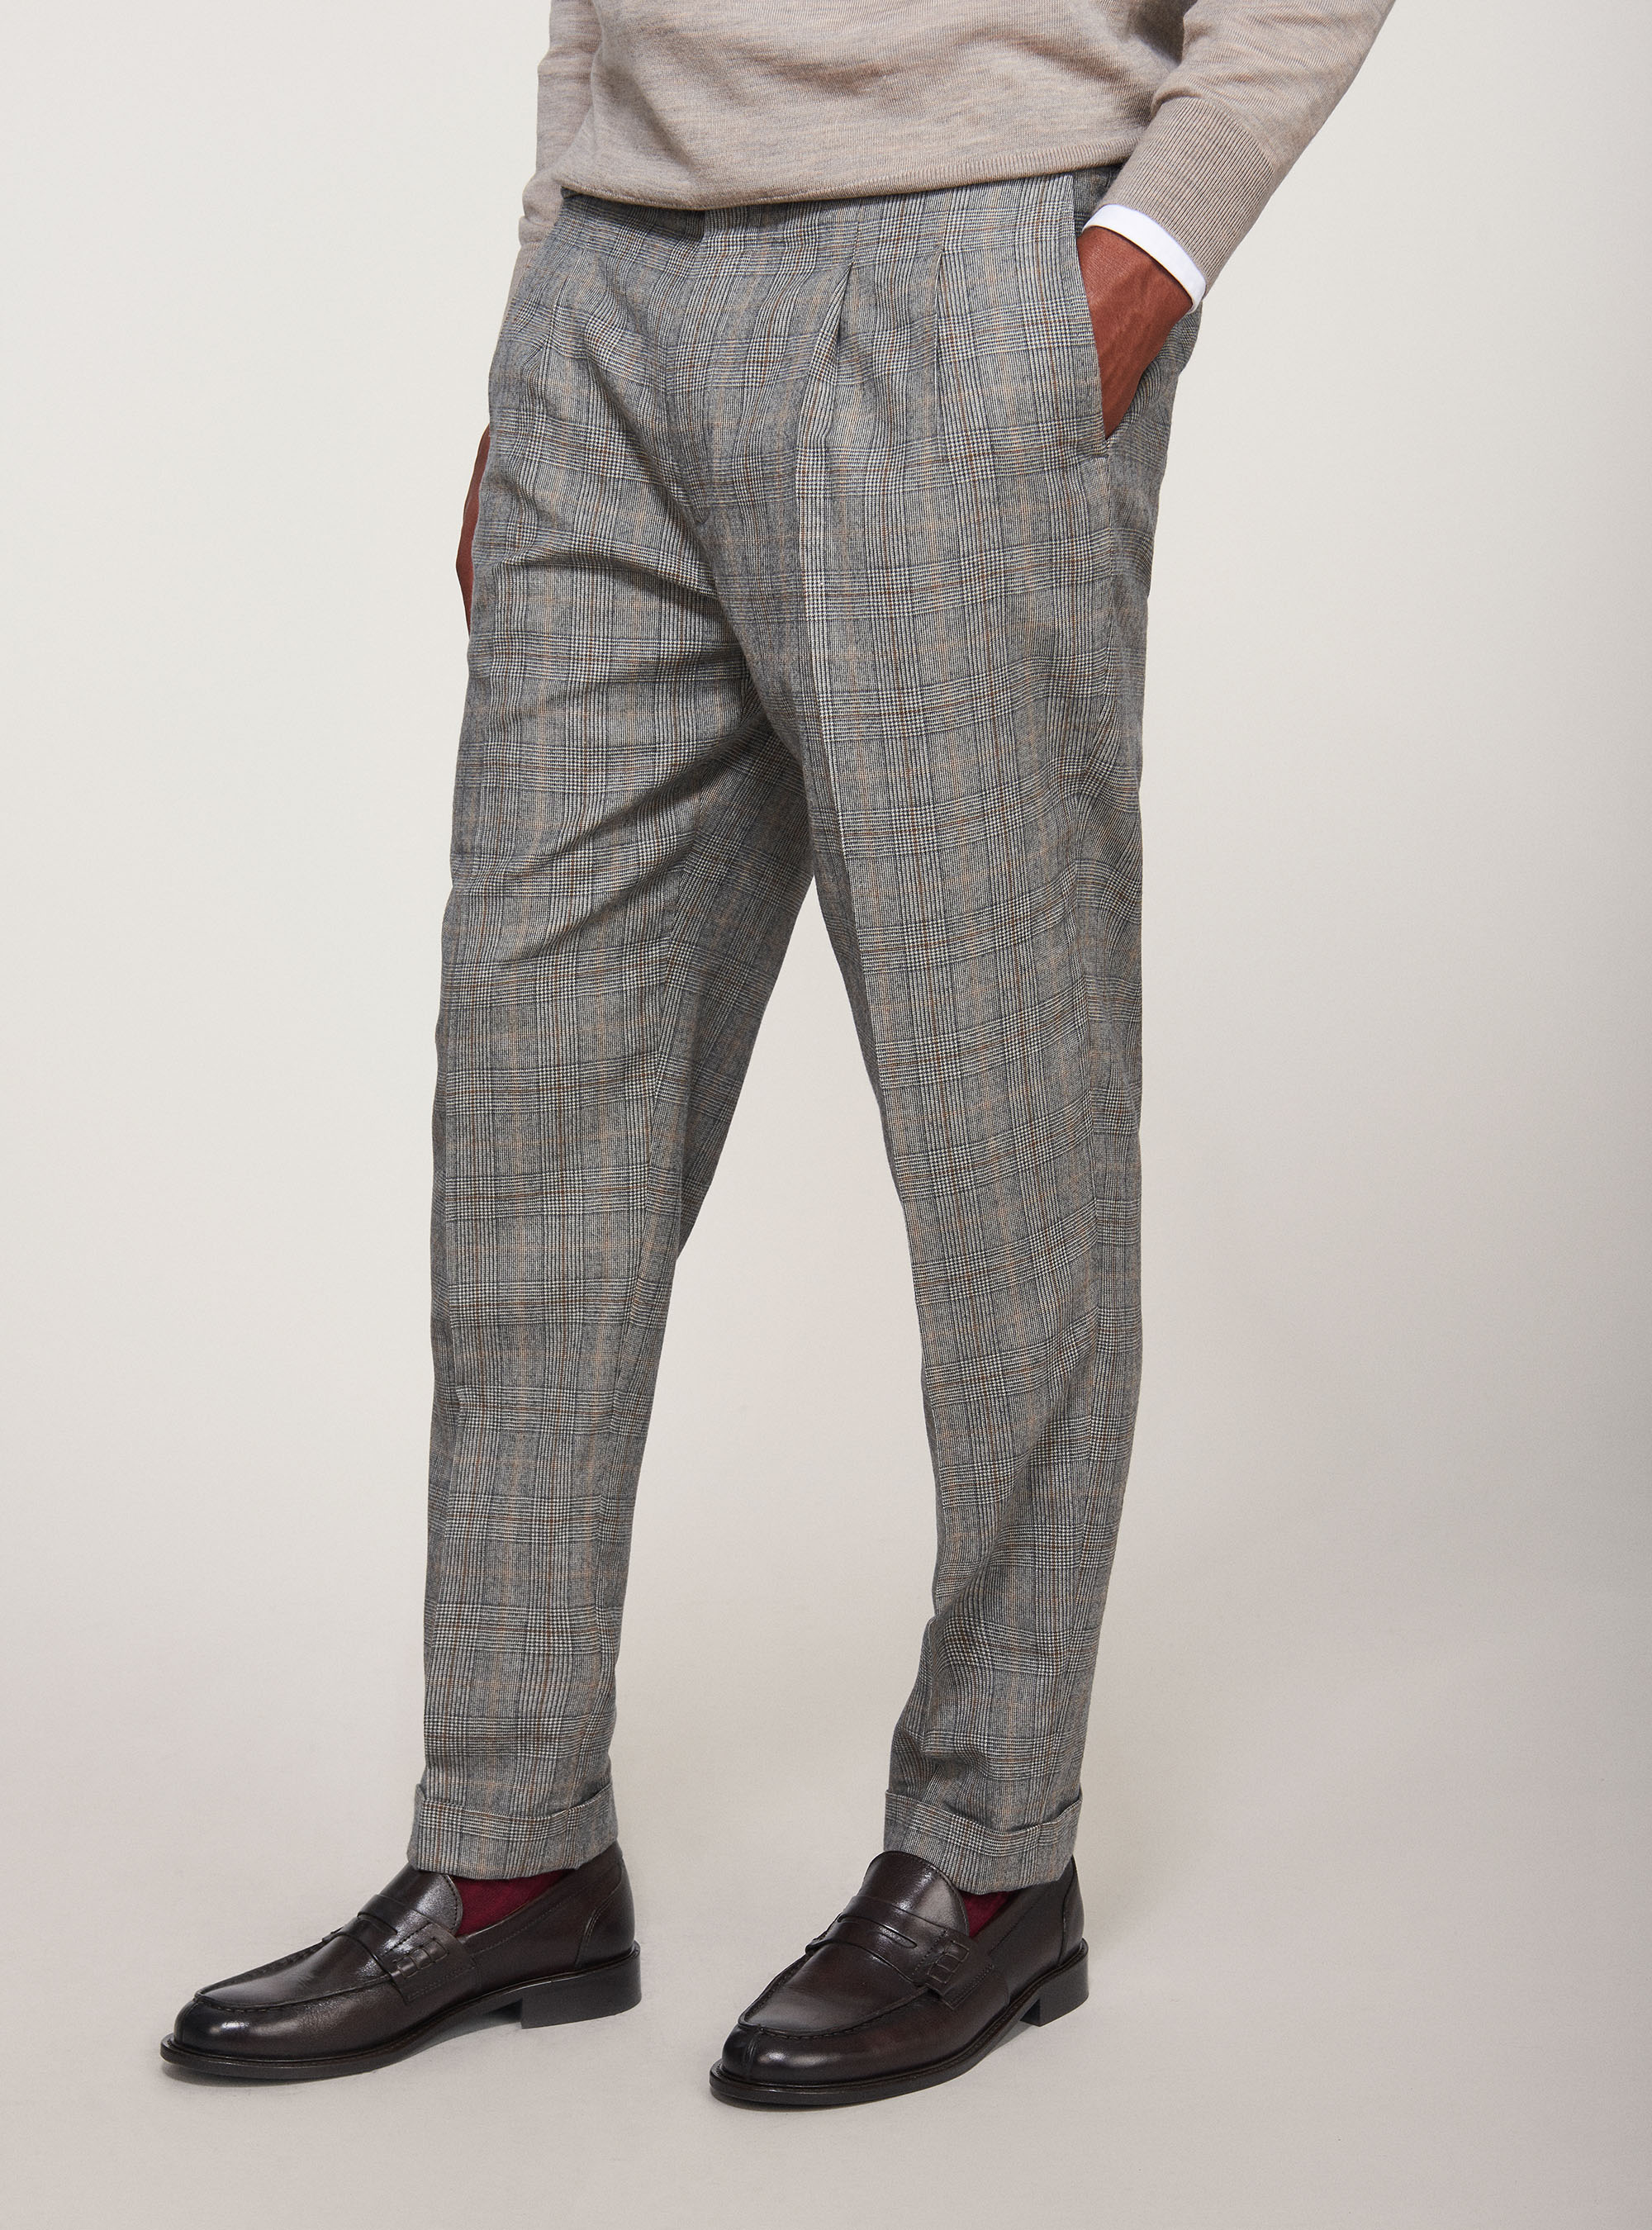 Prince of Wales suit trousers in superfine 120's wool